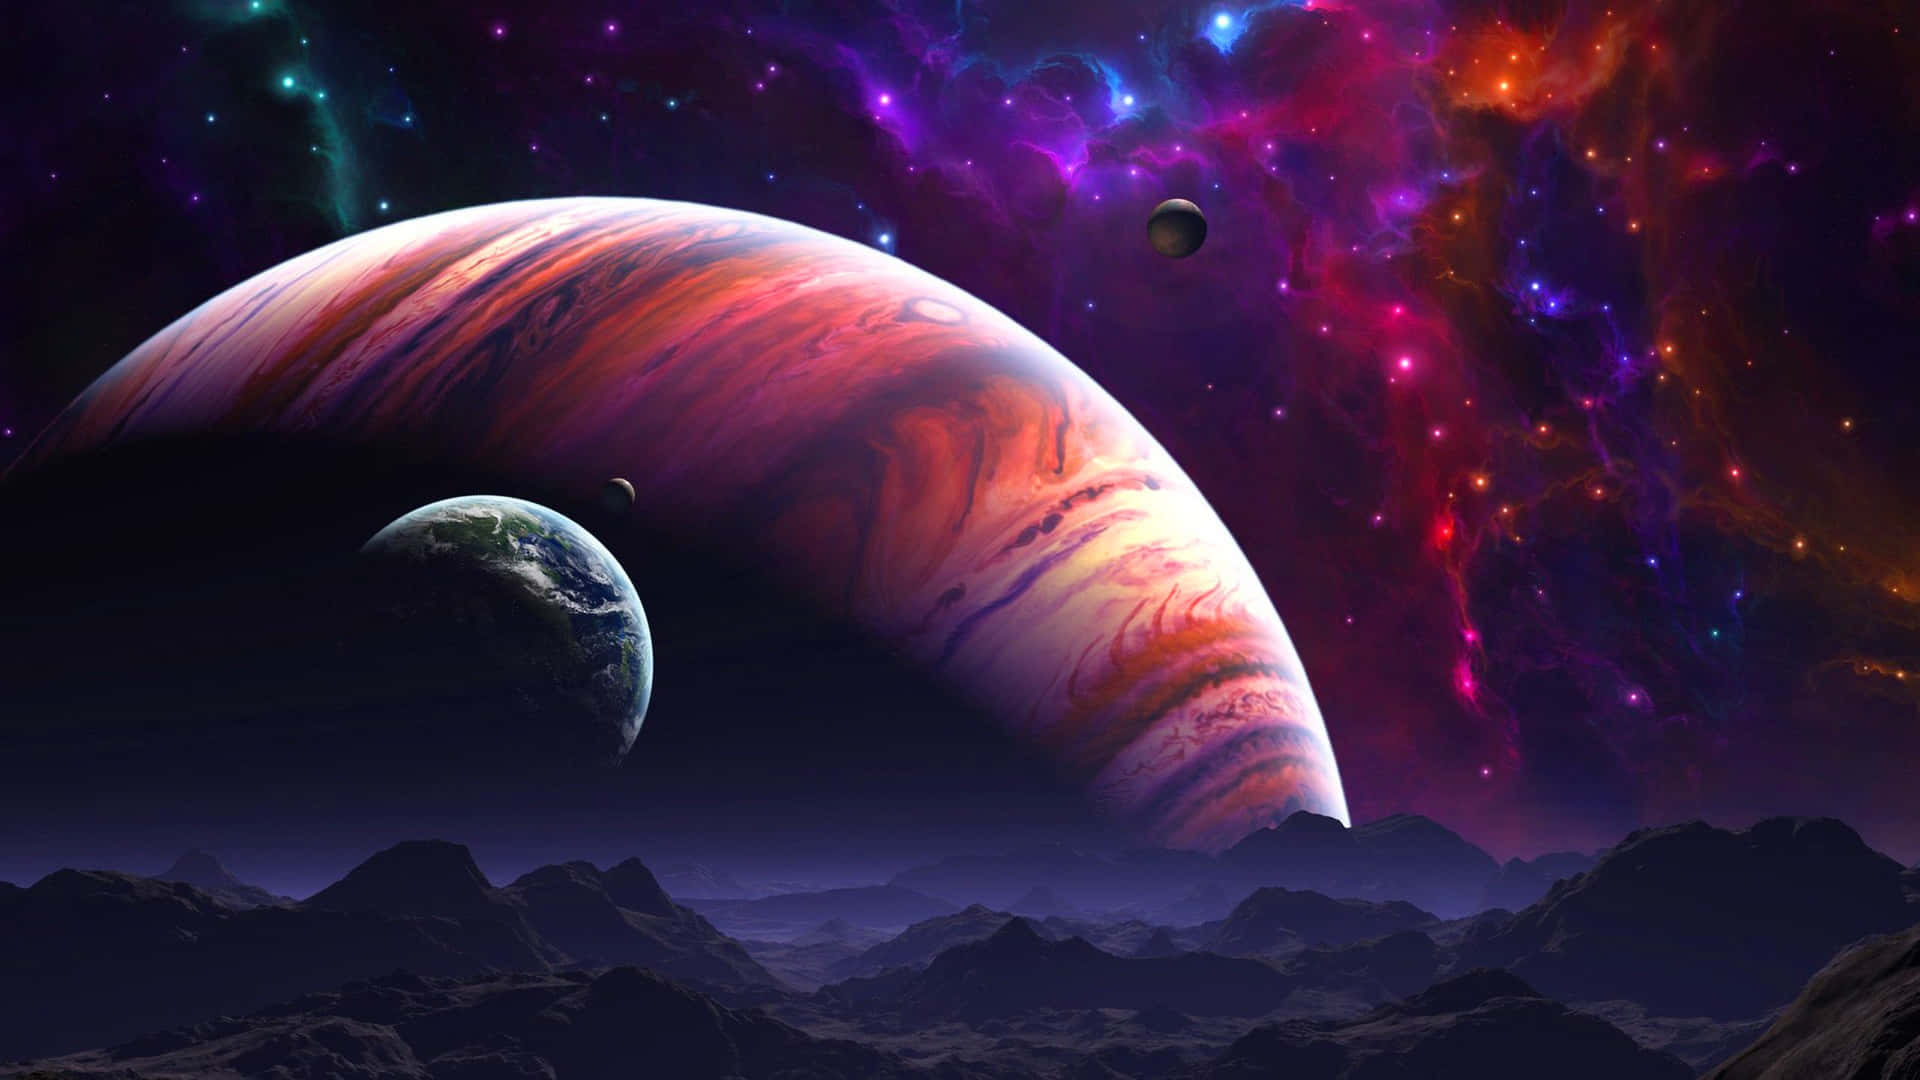 A Colorful Space Scene With Planets And Stars Wallpaper